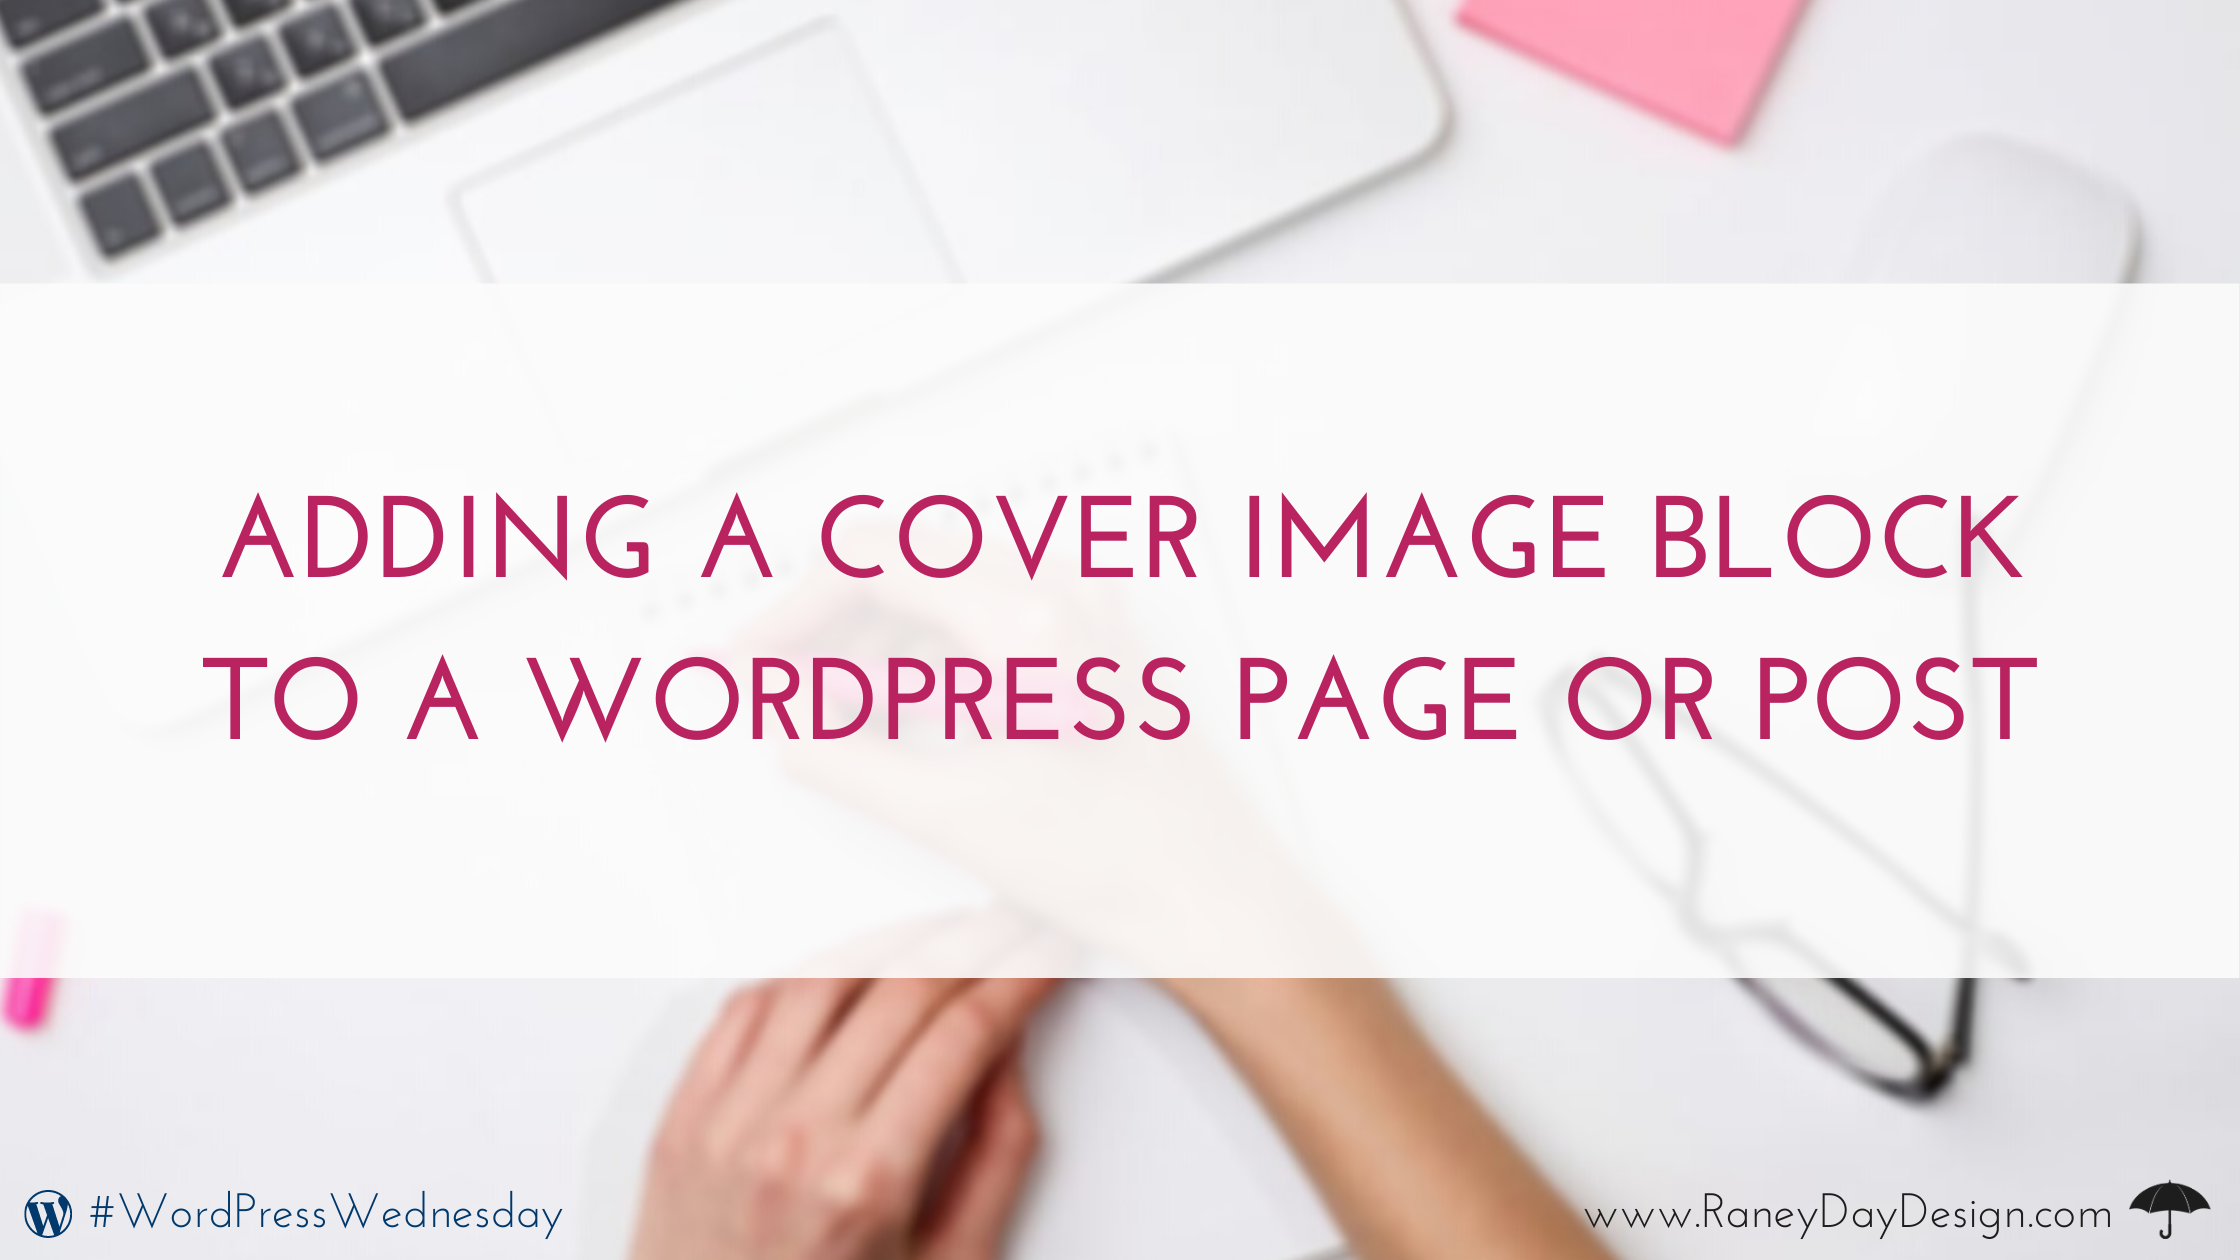 Adding a Cover Image Block to a WordPress Page or Post